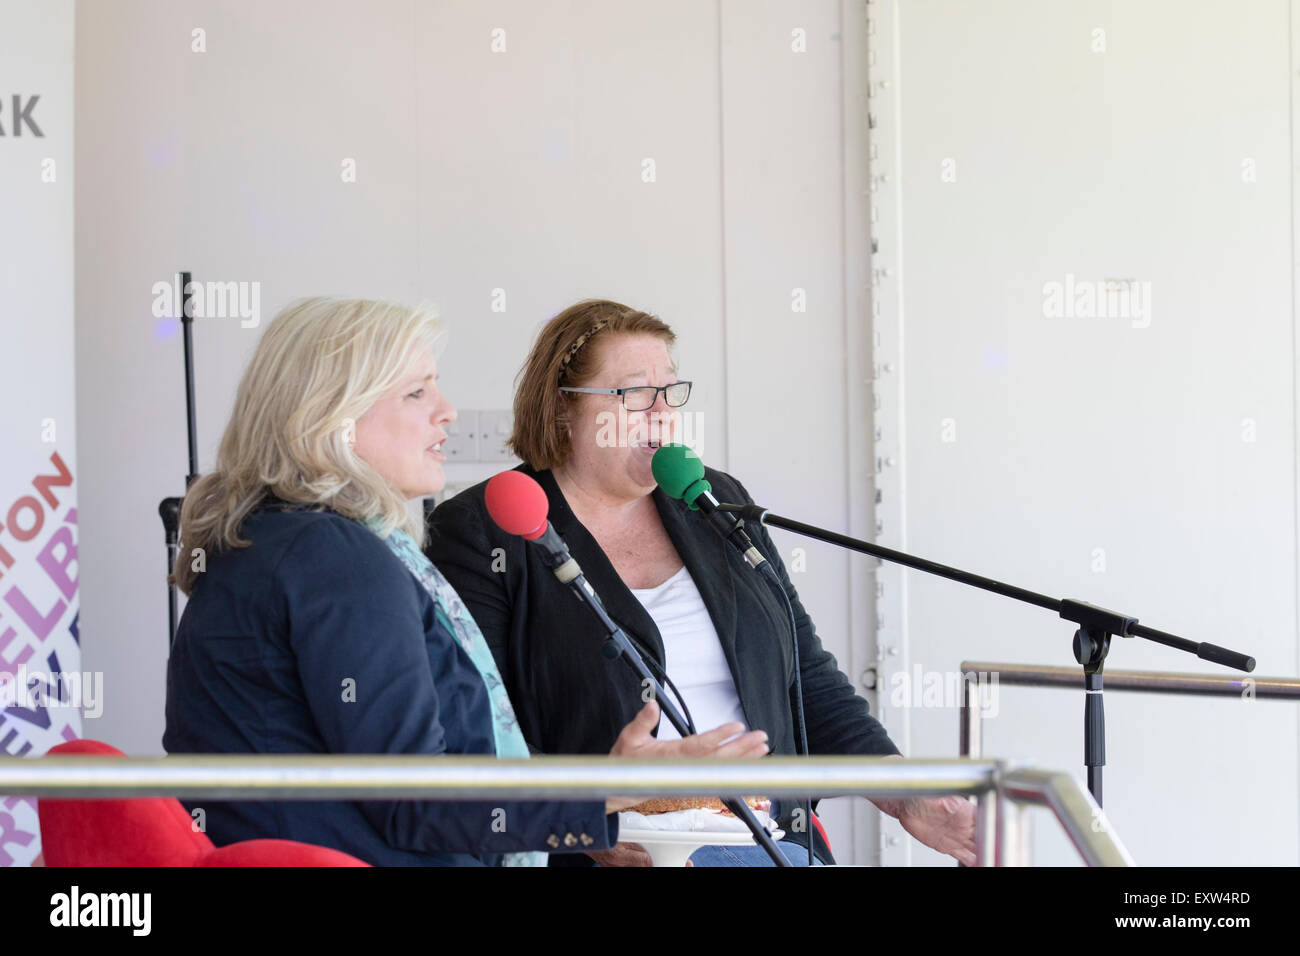 Harrogate, North Yorkshire, UK. 15th July, 2015 Rosemary Shrager being interviewed by  georgey spanswick on radio york at  The G Stock Photo